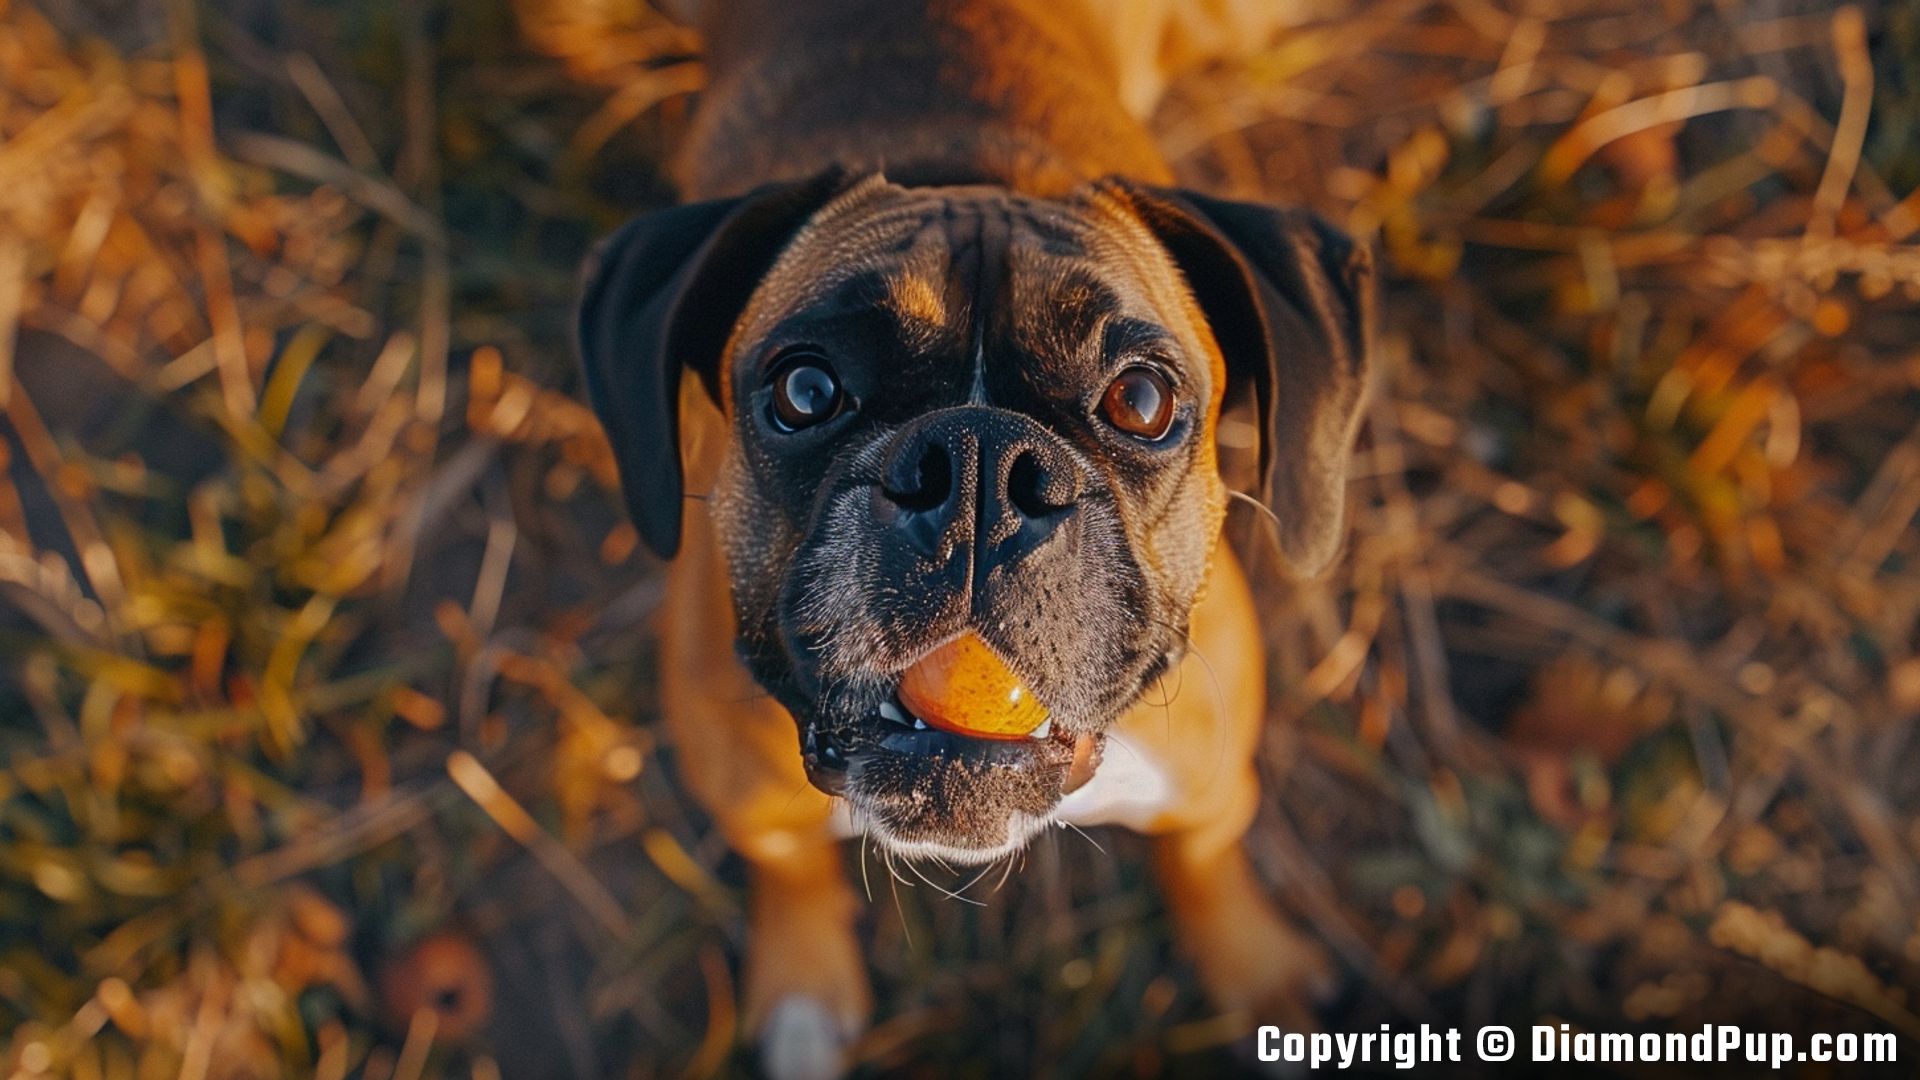 Photograph of a Playful Boxer Eating Peaches